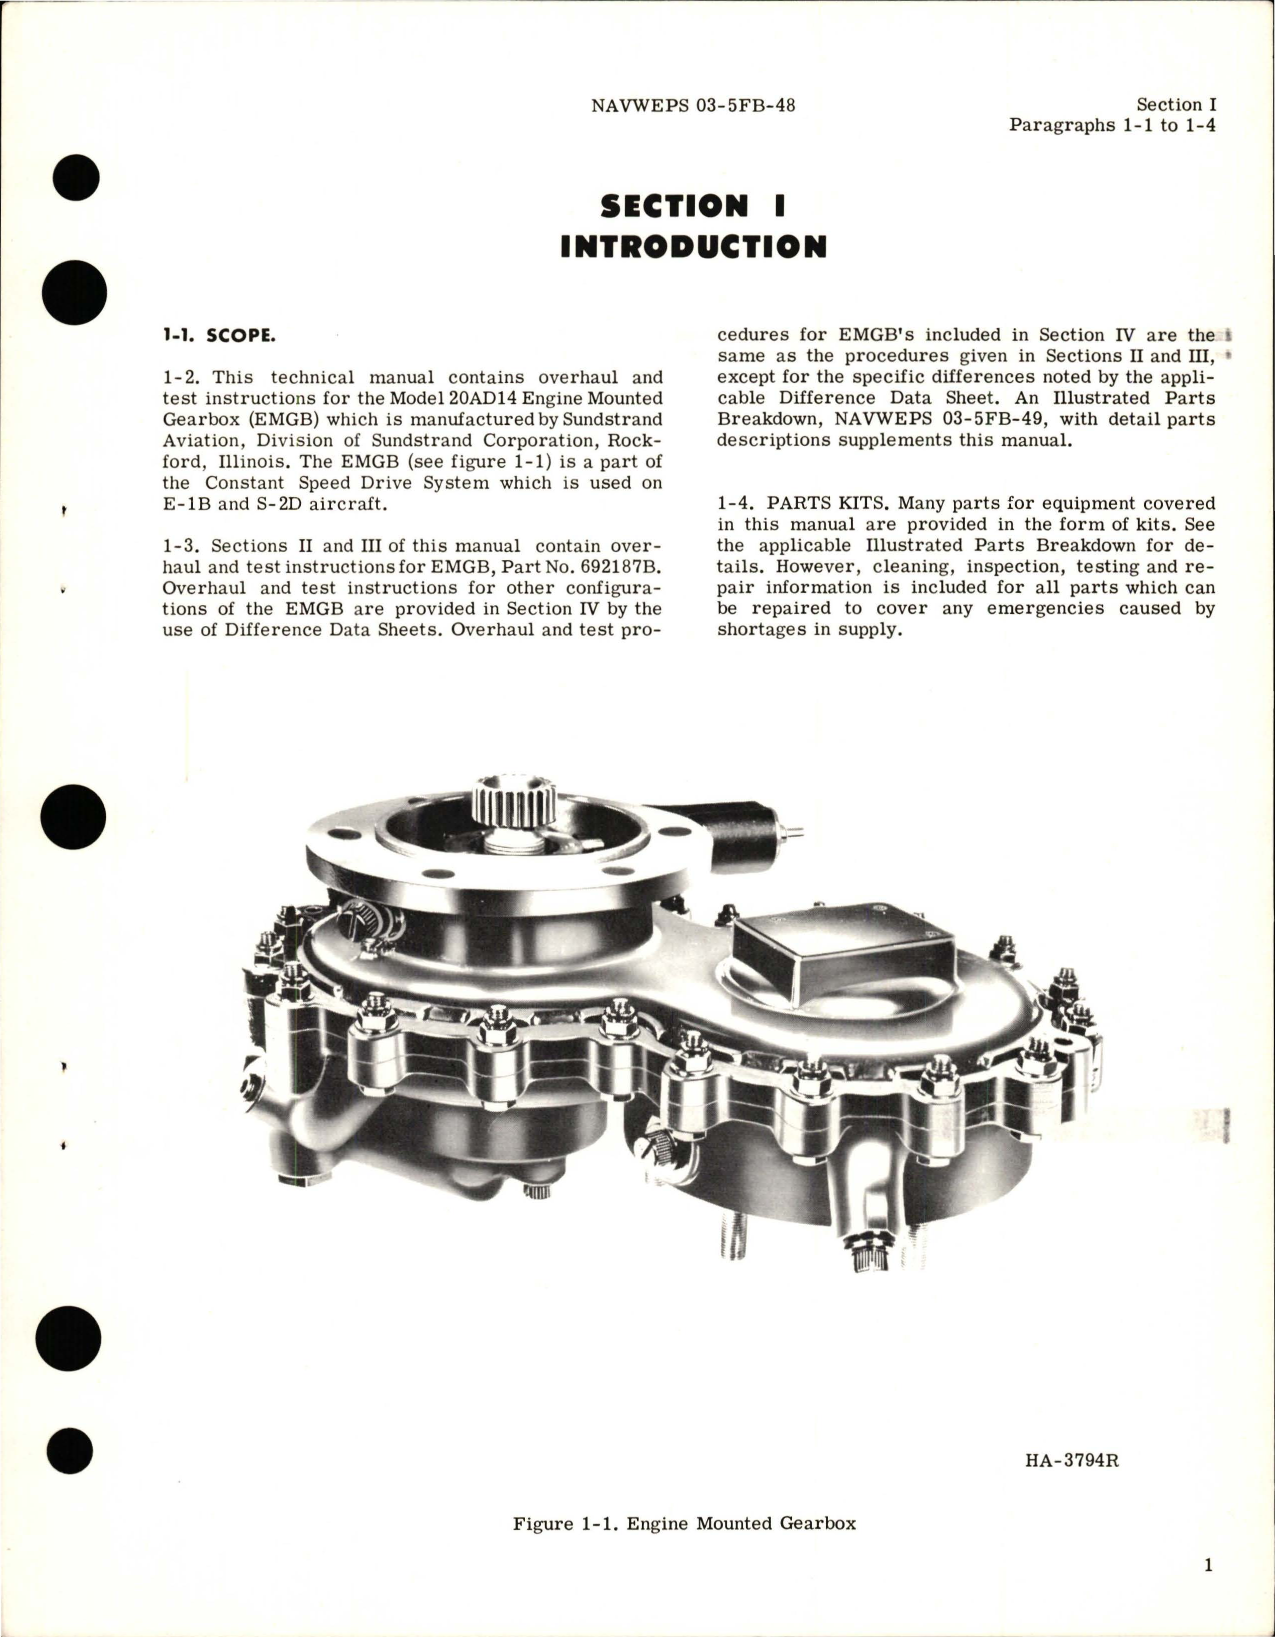 Sample page 5 from AirCorps Library document: Overhaul Instructions for Engine Mounted Gearbox - E-1B and S-2D